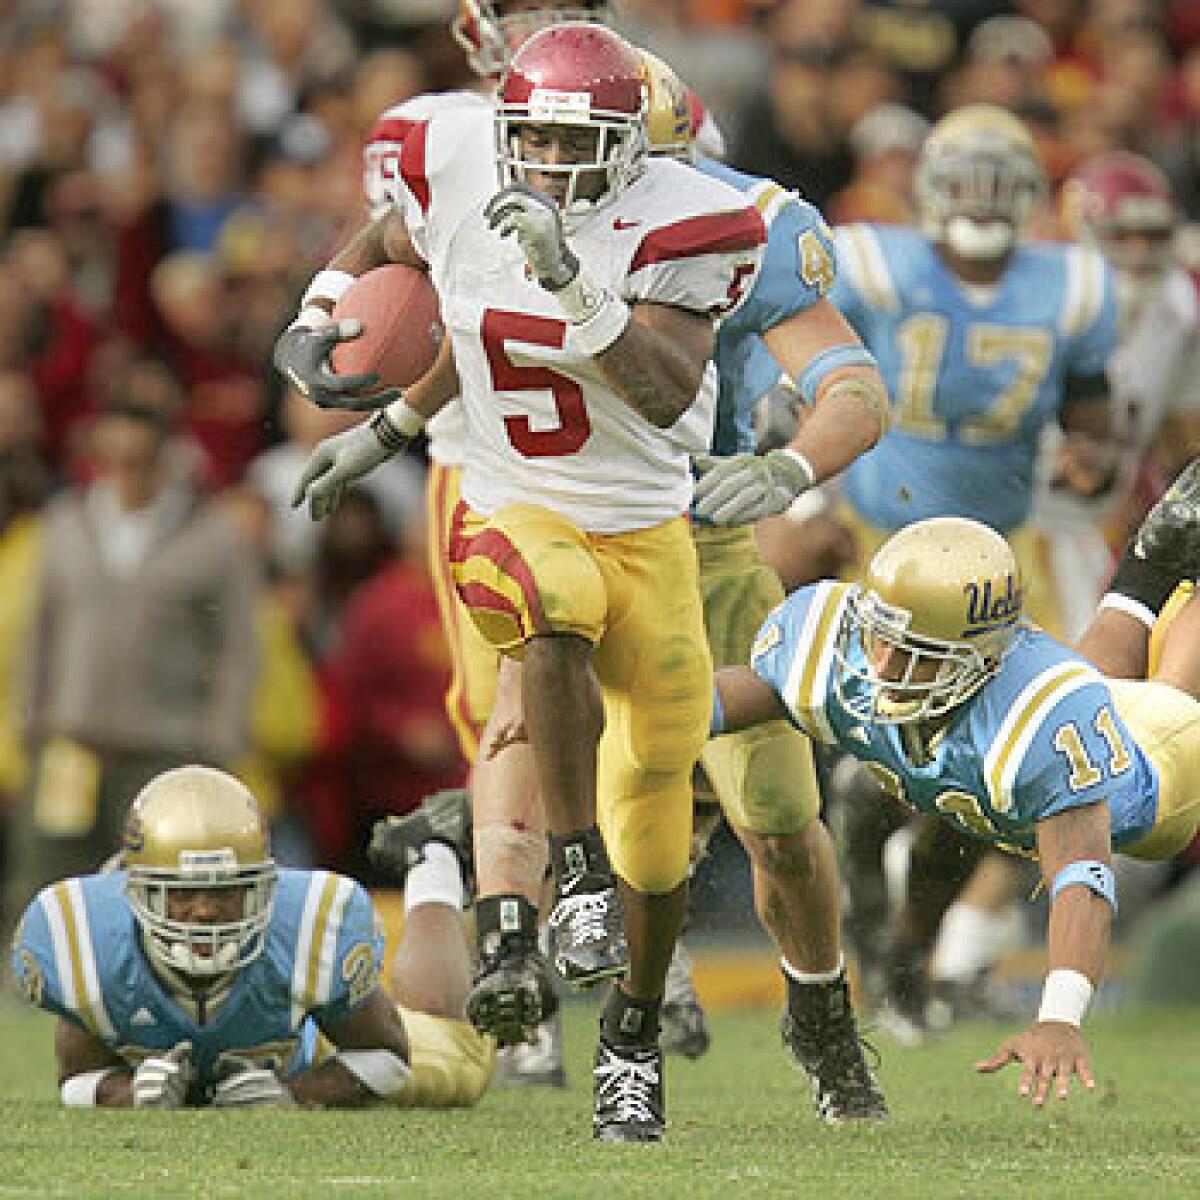 USC running back Reggie Bush breaks free from UCLA's Trey Brown, left, and Dennis Keyes to score on a 78-yard touchdown.